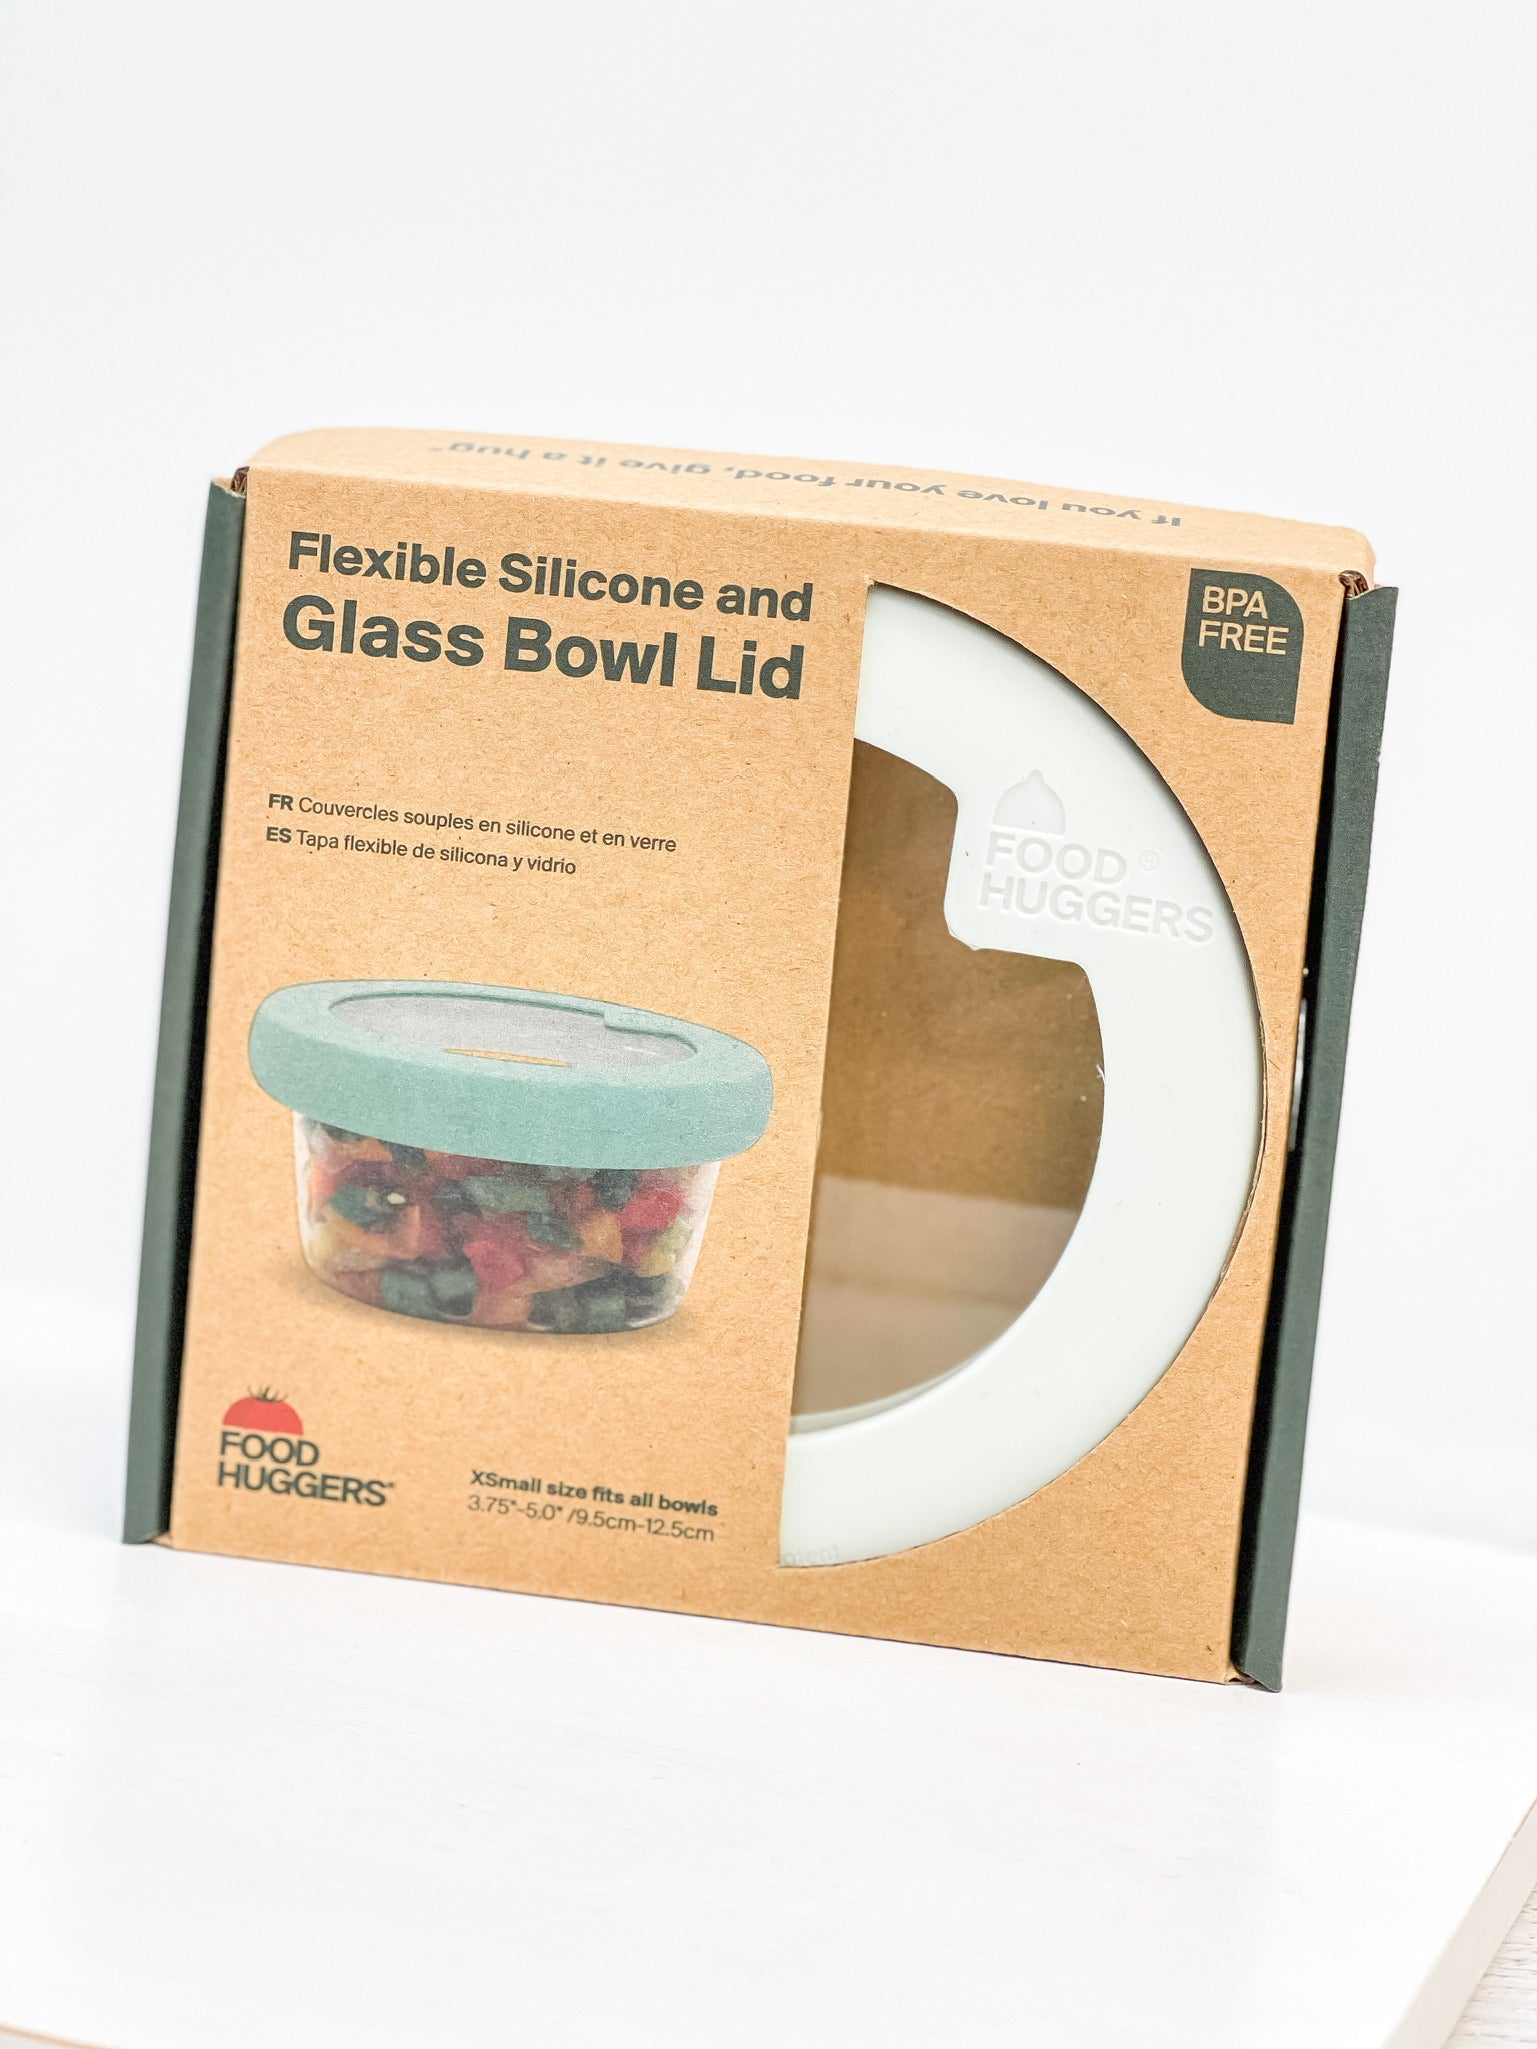 Flexible Silicone Glass Bowl Lid - XS